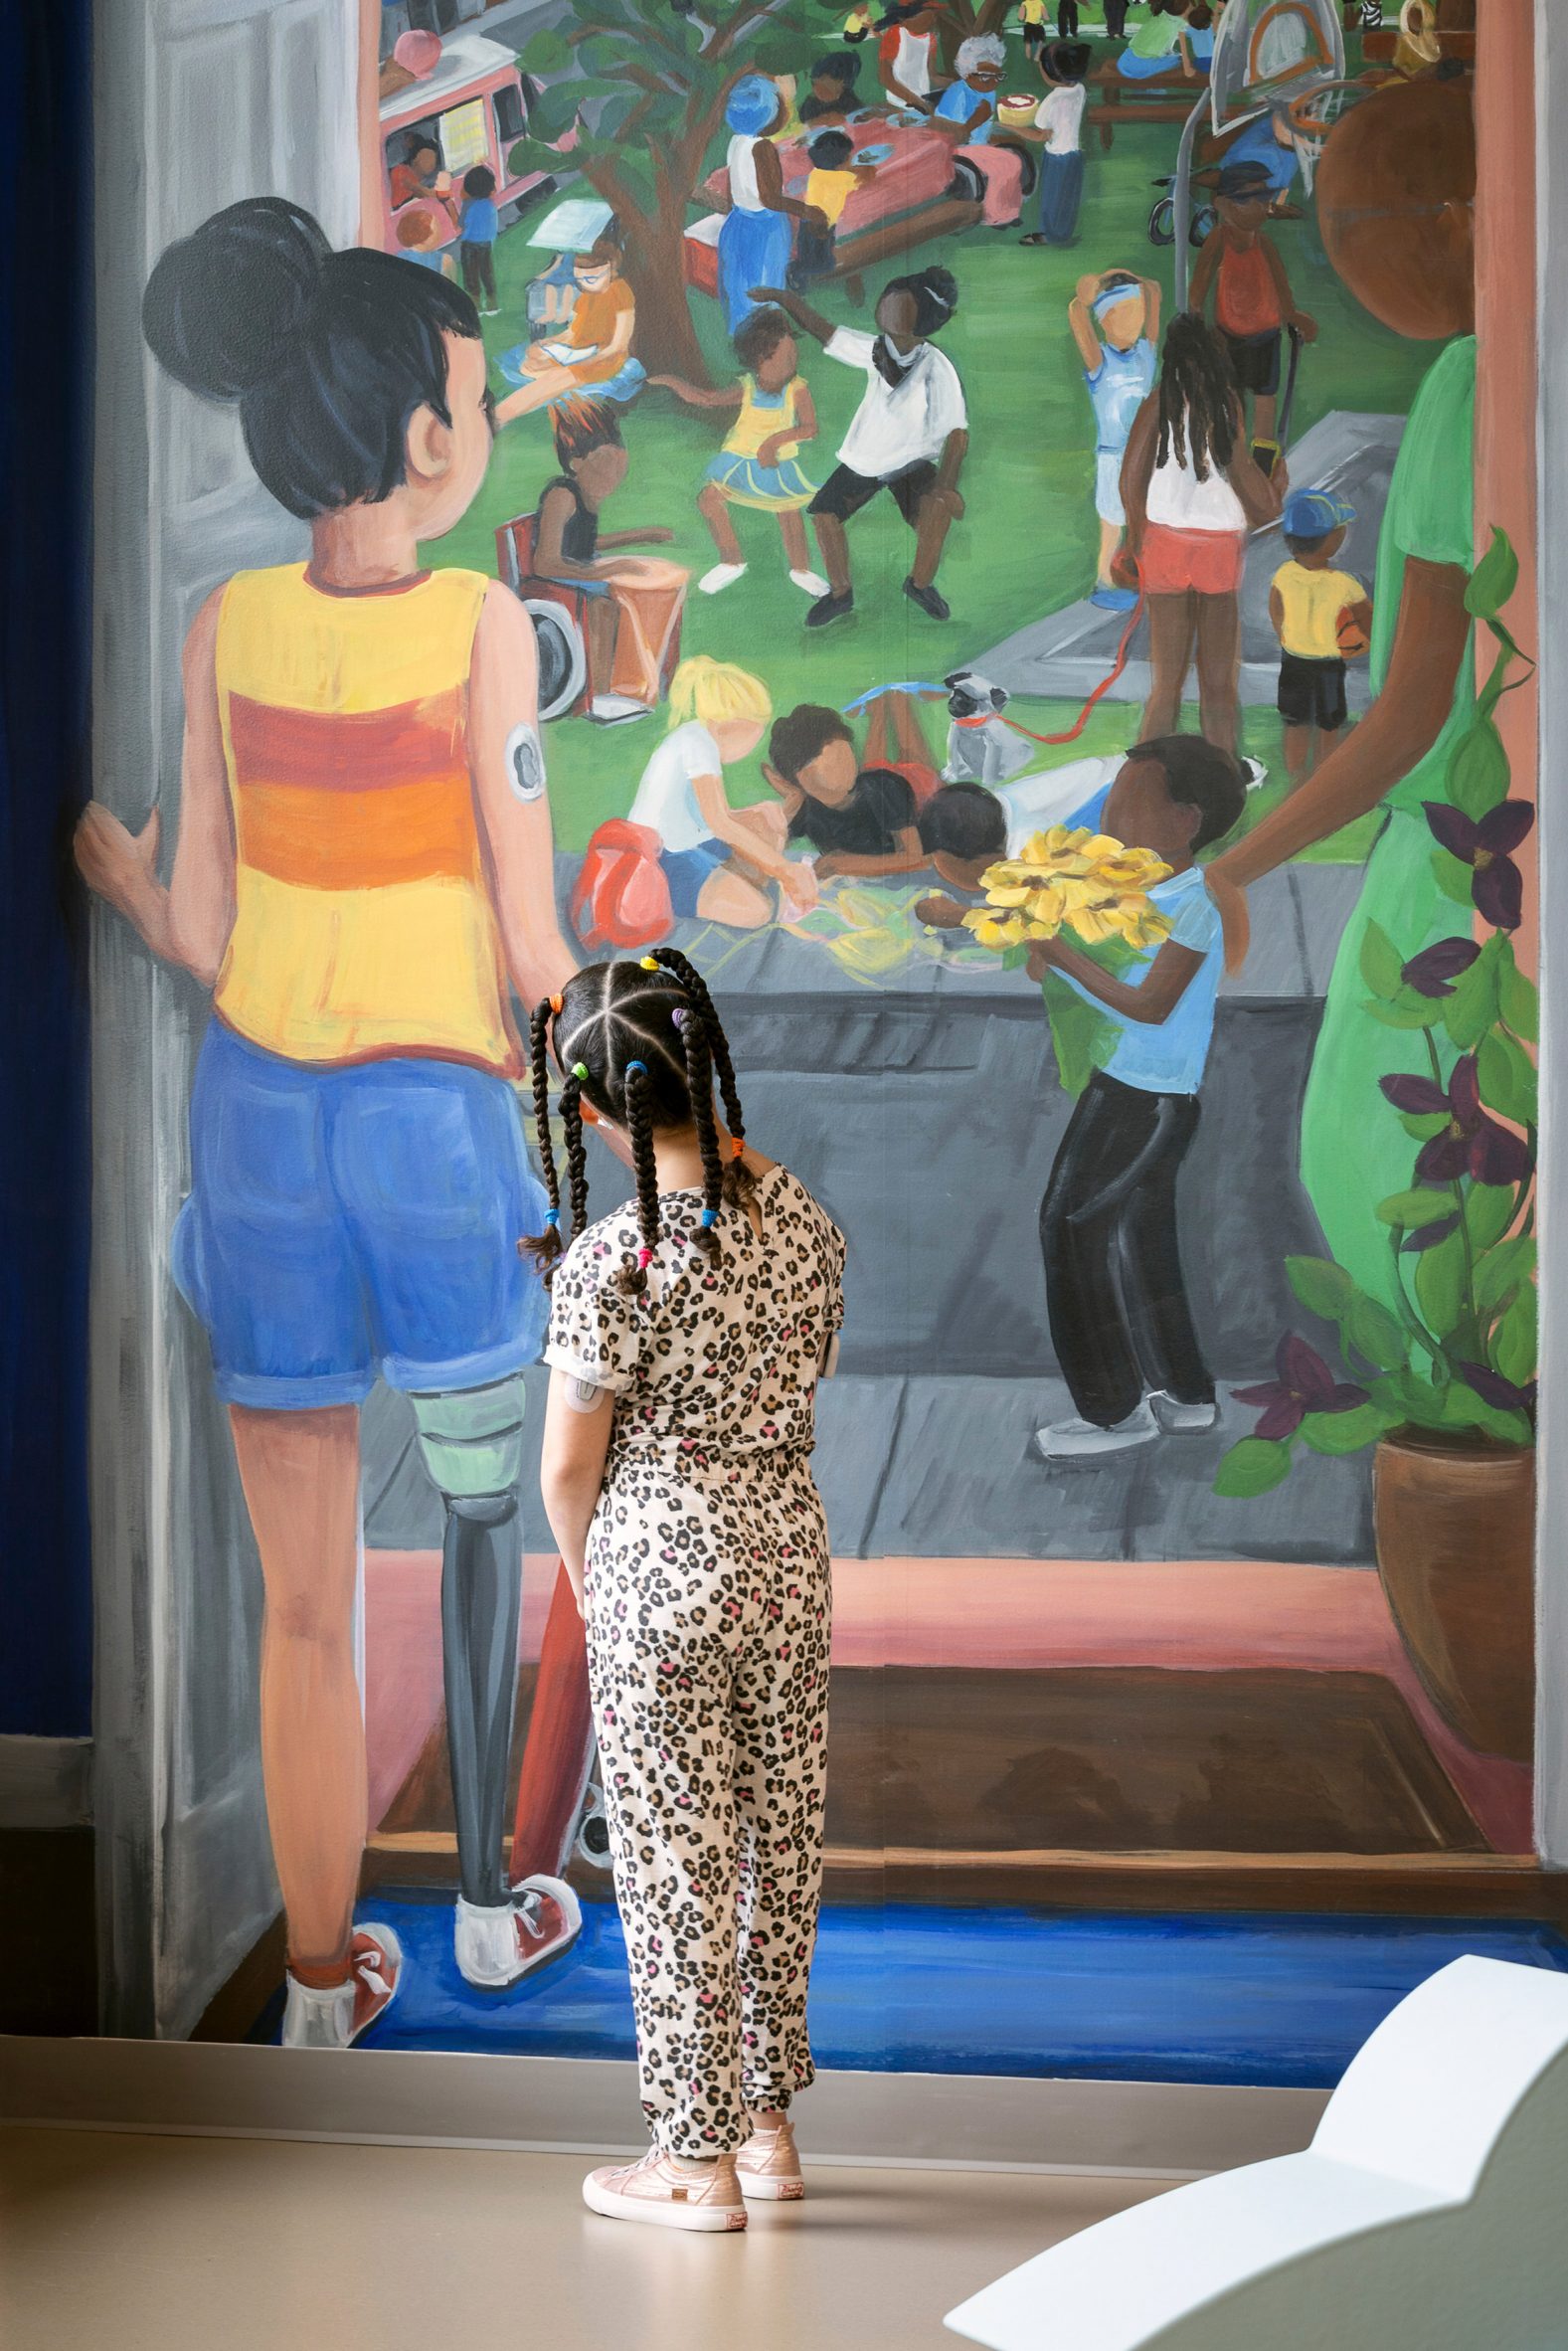 Bright and colourful mural within Odessa Brown Children's Clinic